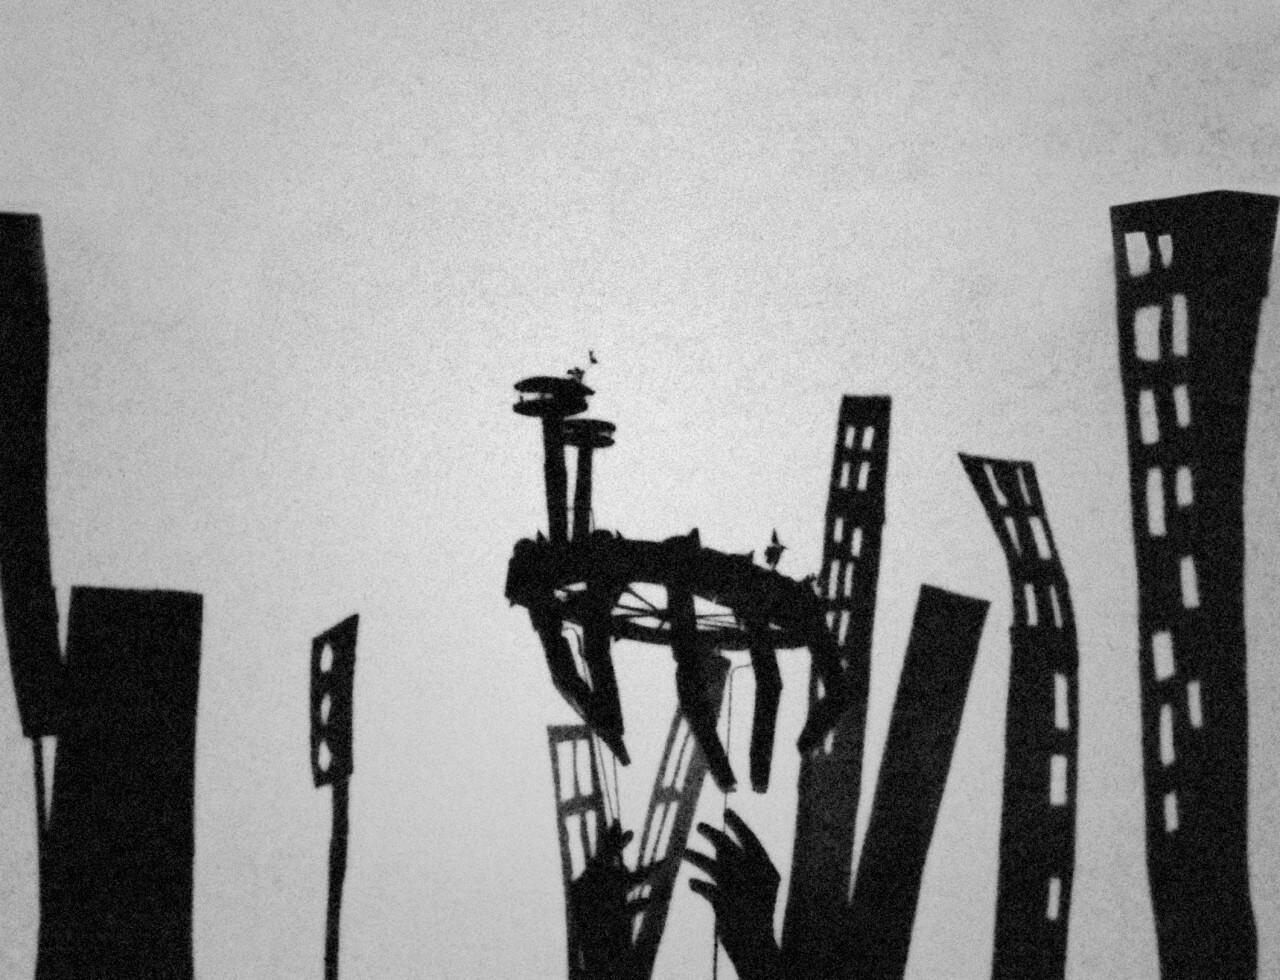 a film still depicting shadows of a puppeteer’s hands and miniature buildings in the great ruins of saturn